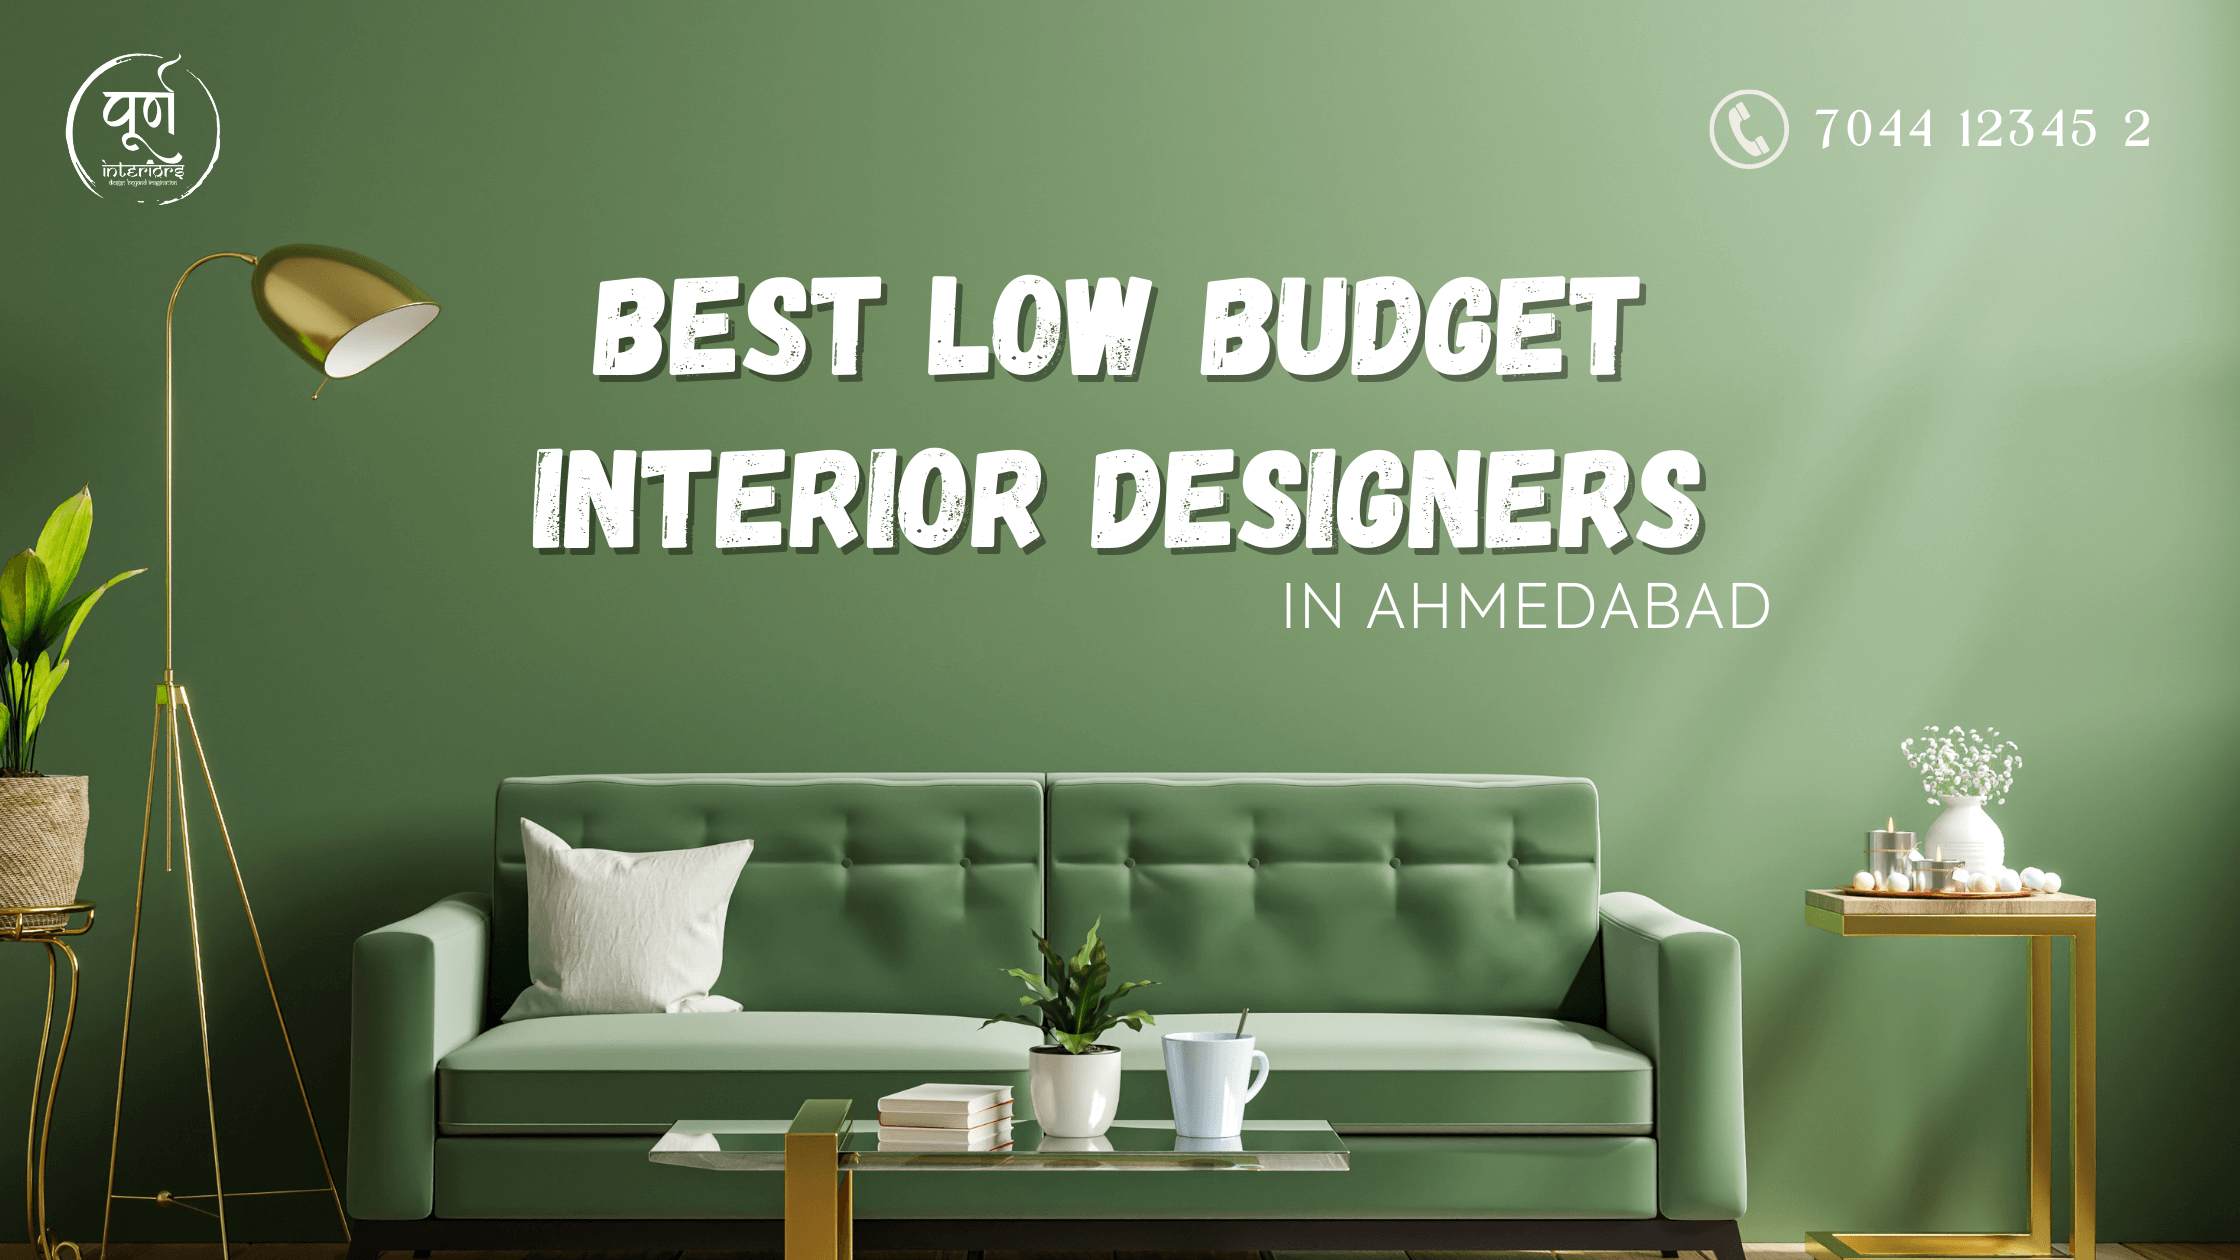 Best Low Budget Interior Designers In Ahmedabad